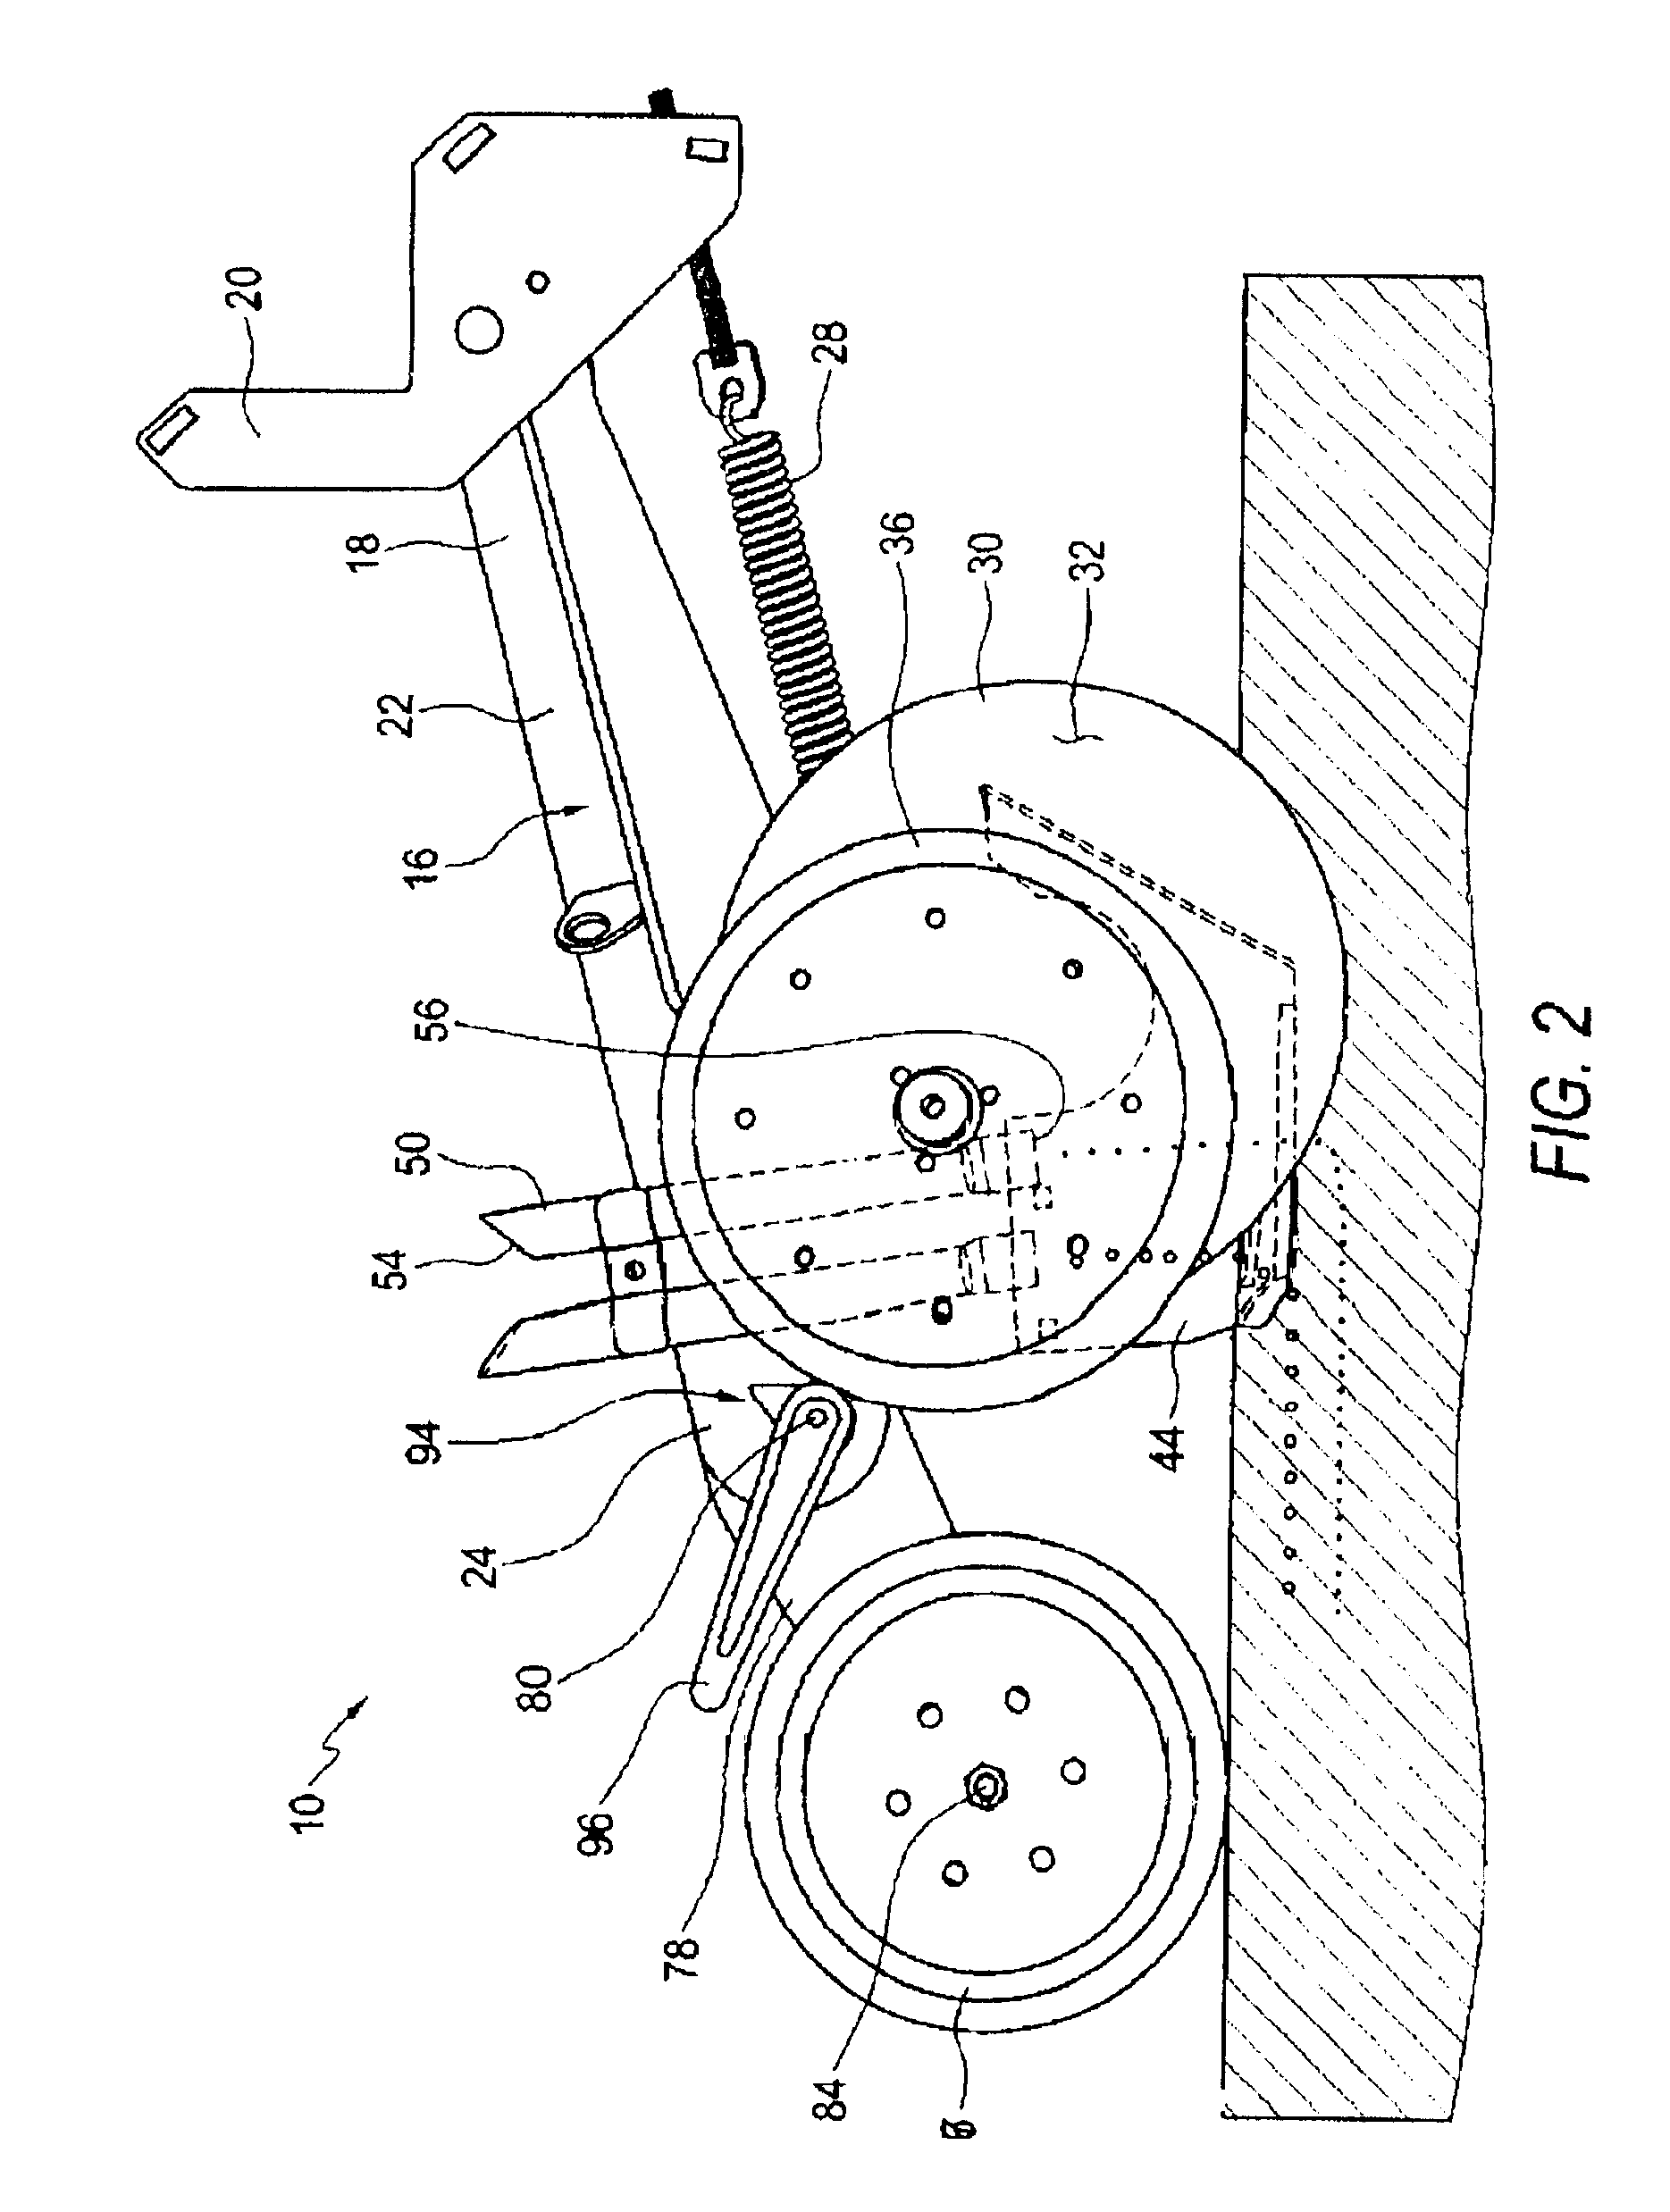 Furrow opener apparatus with two way depth control